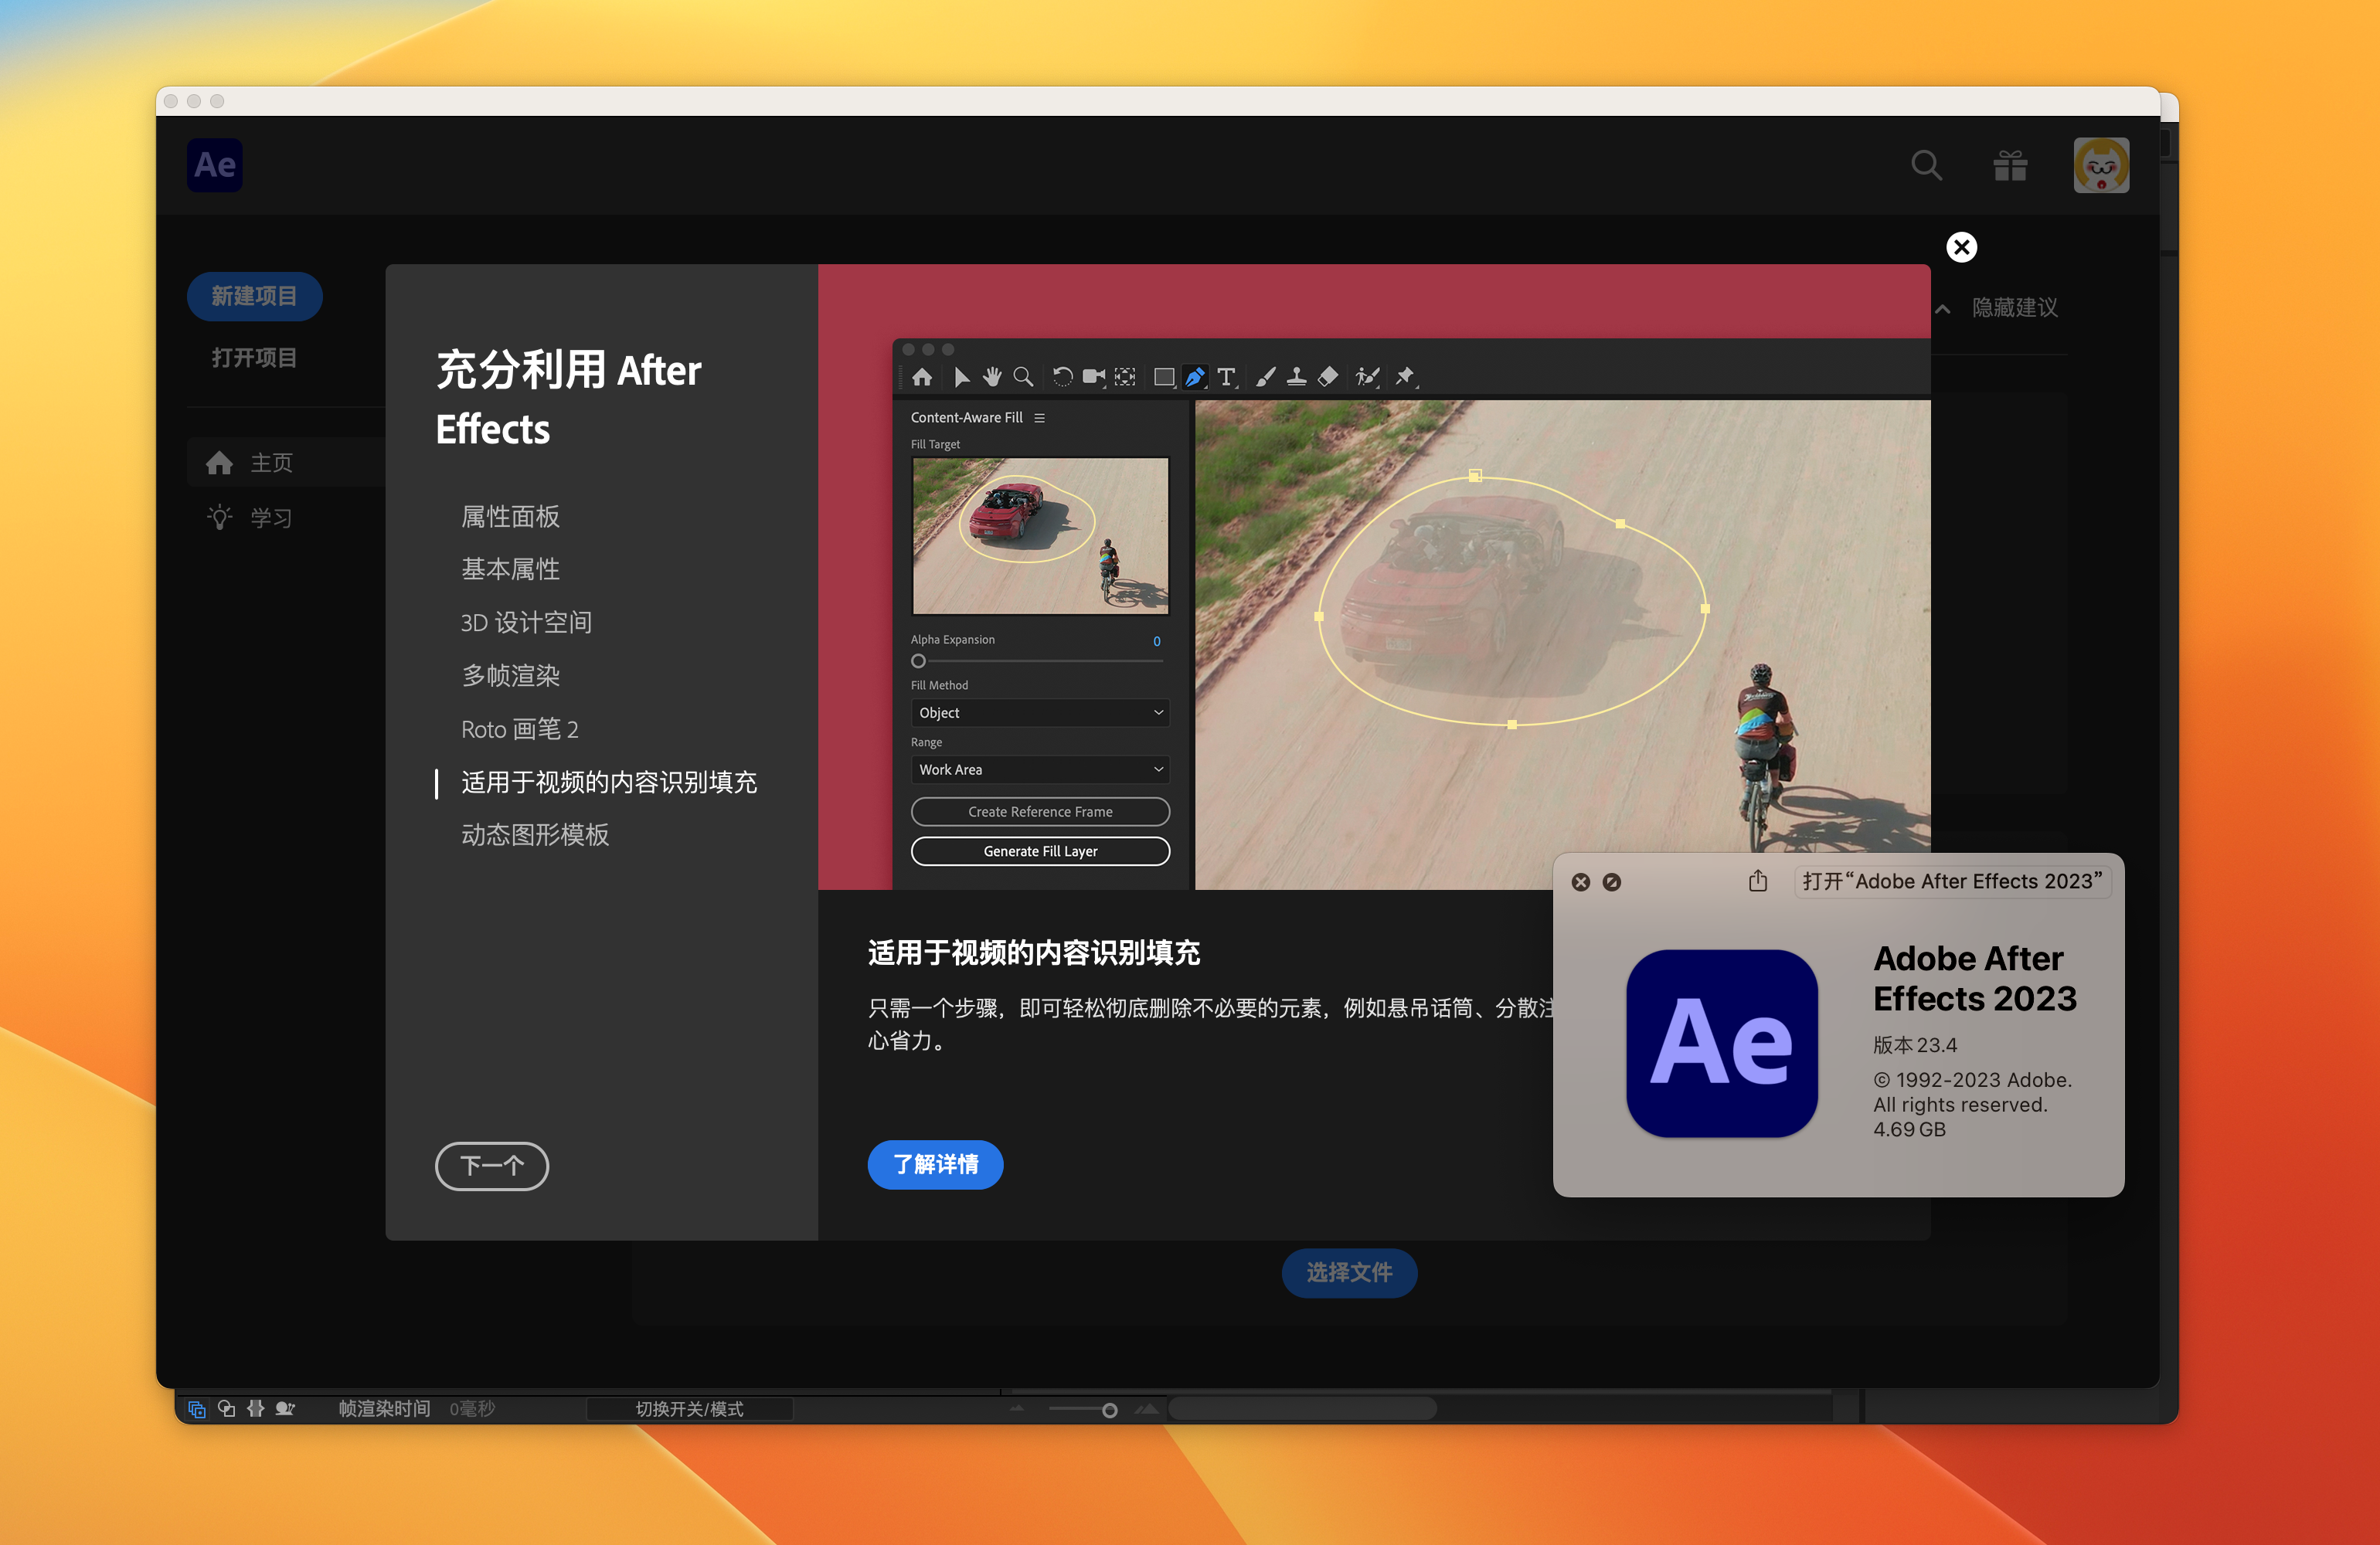 After Effects 2023 for Mac v23.4 激活版 intel/M1通用 (AE 2023)